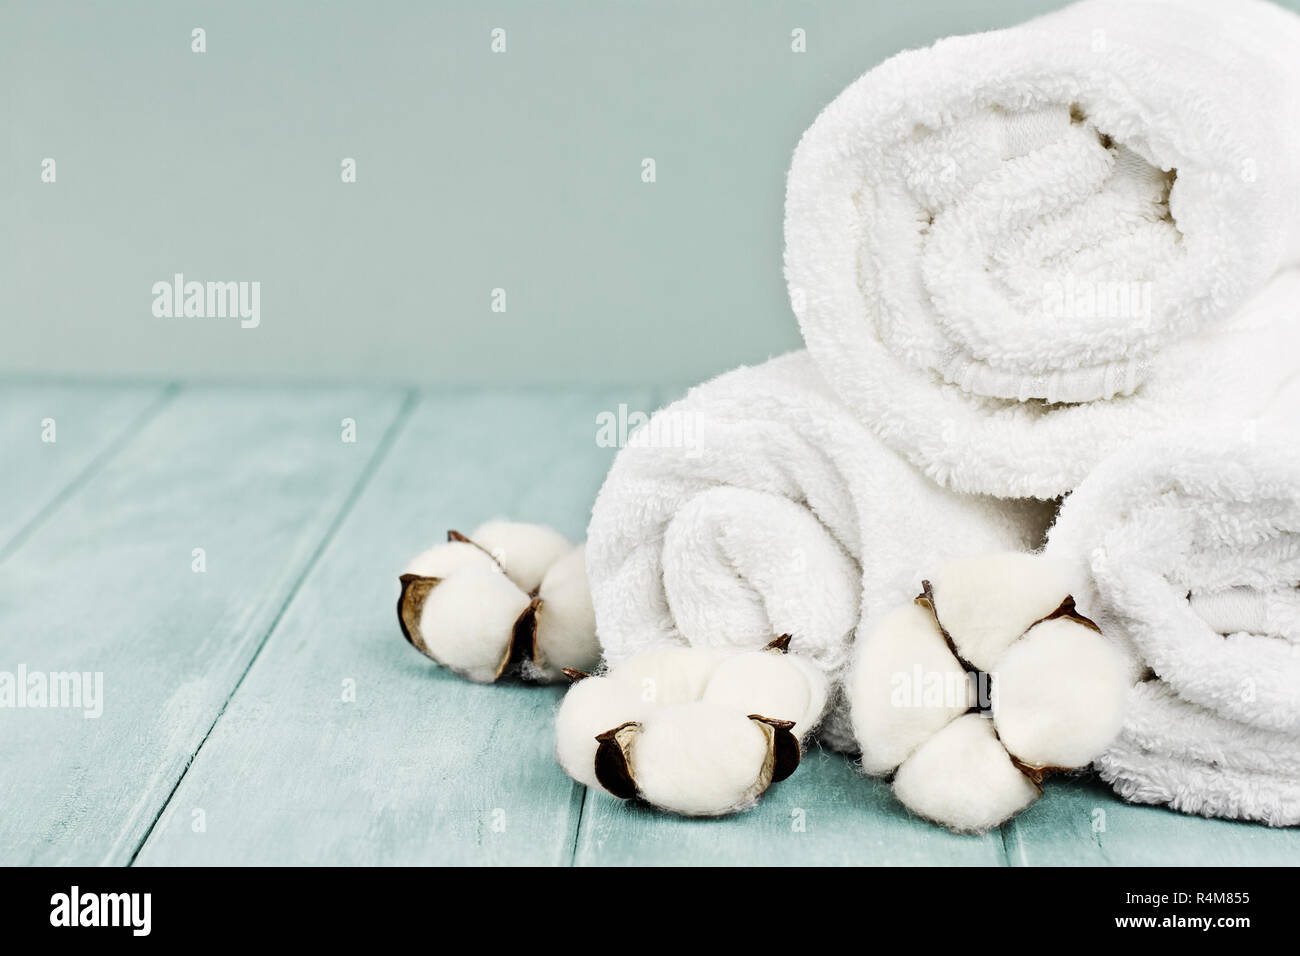 Rolled up white fluffy towels with cotton flowers against a blurred blue background with free space for text. Stock Photo